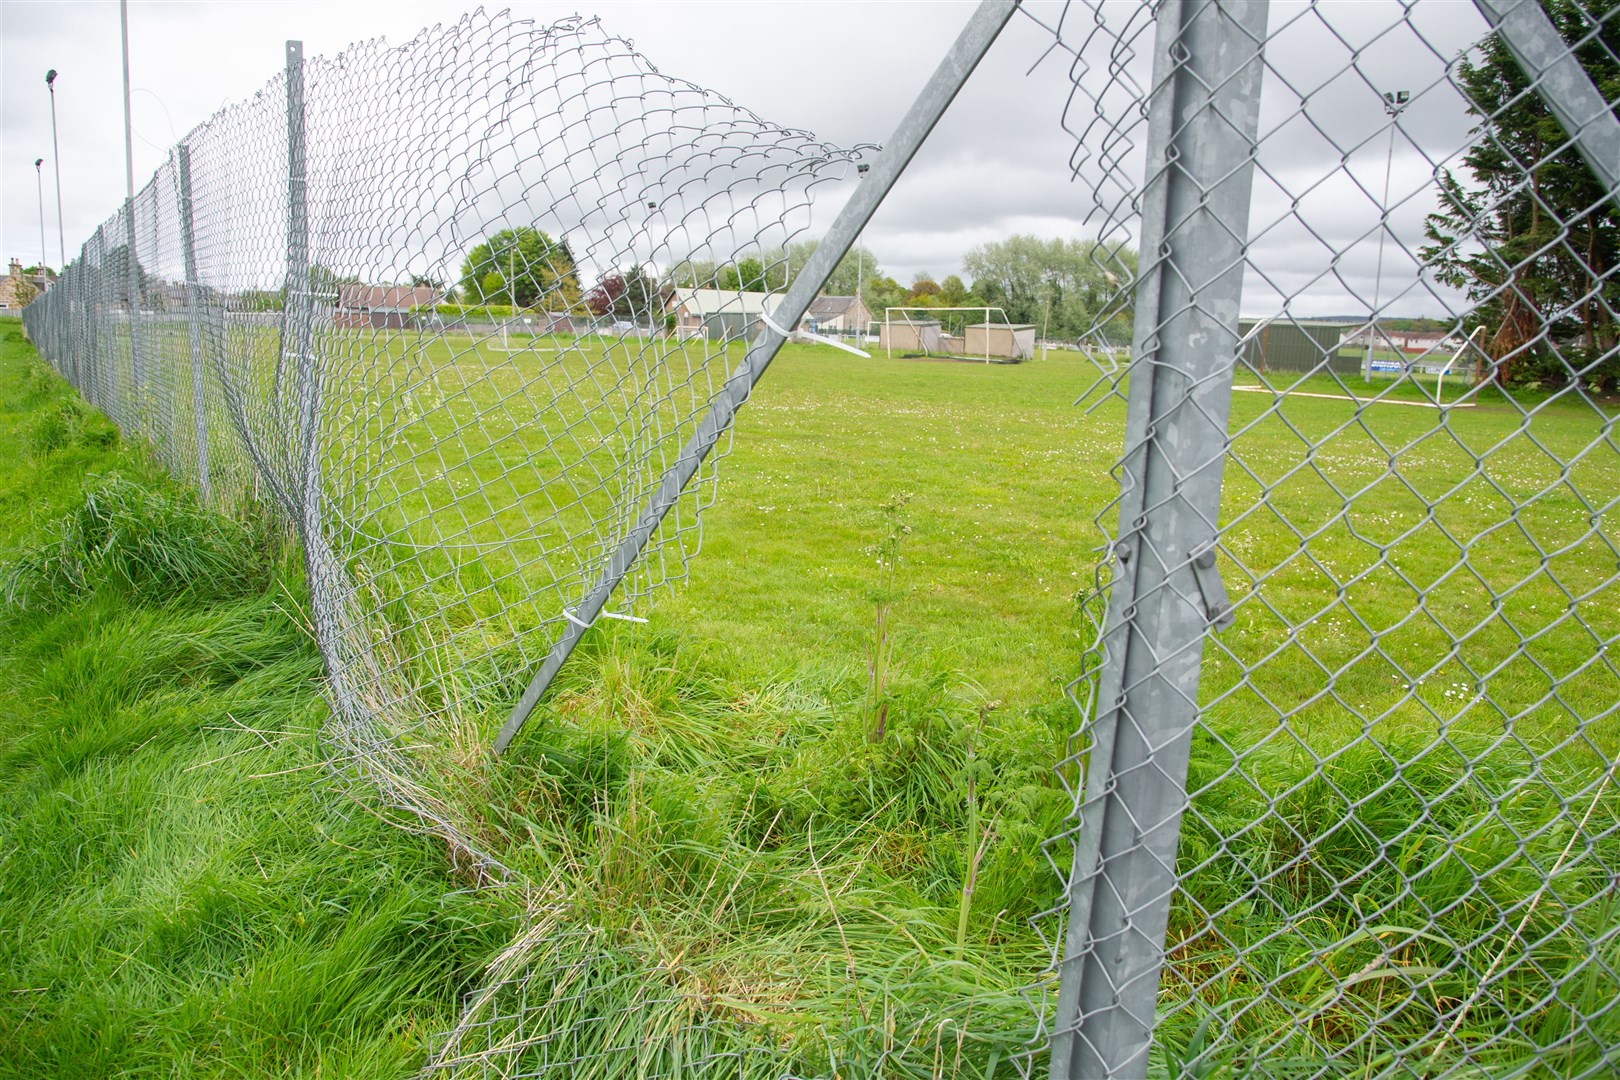 A hole is still visable, although the club have made temporary repairs on some of the fence...The perimeter fence at Logie Park, home of Forres Thistle, has been vandalised...Picture: Daniel Forsyth..